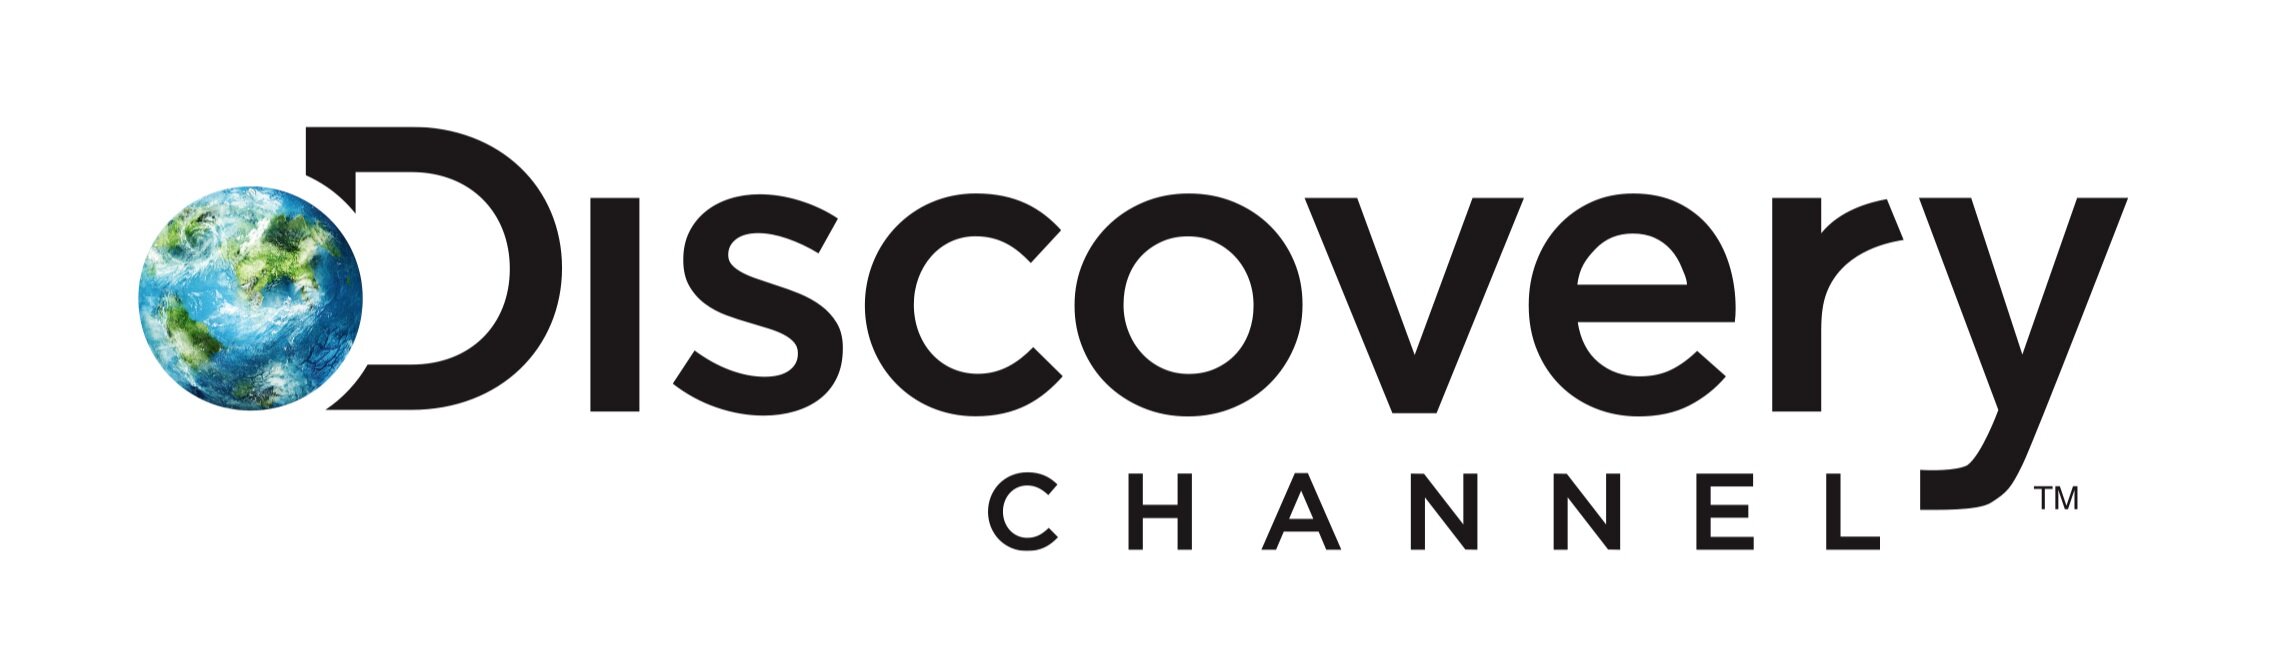 Discovery+Channel.jpg